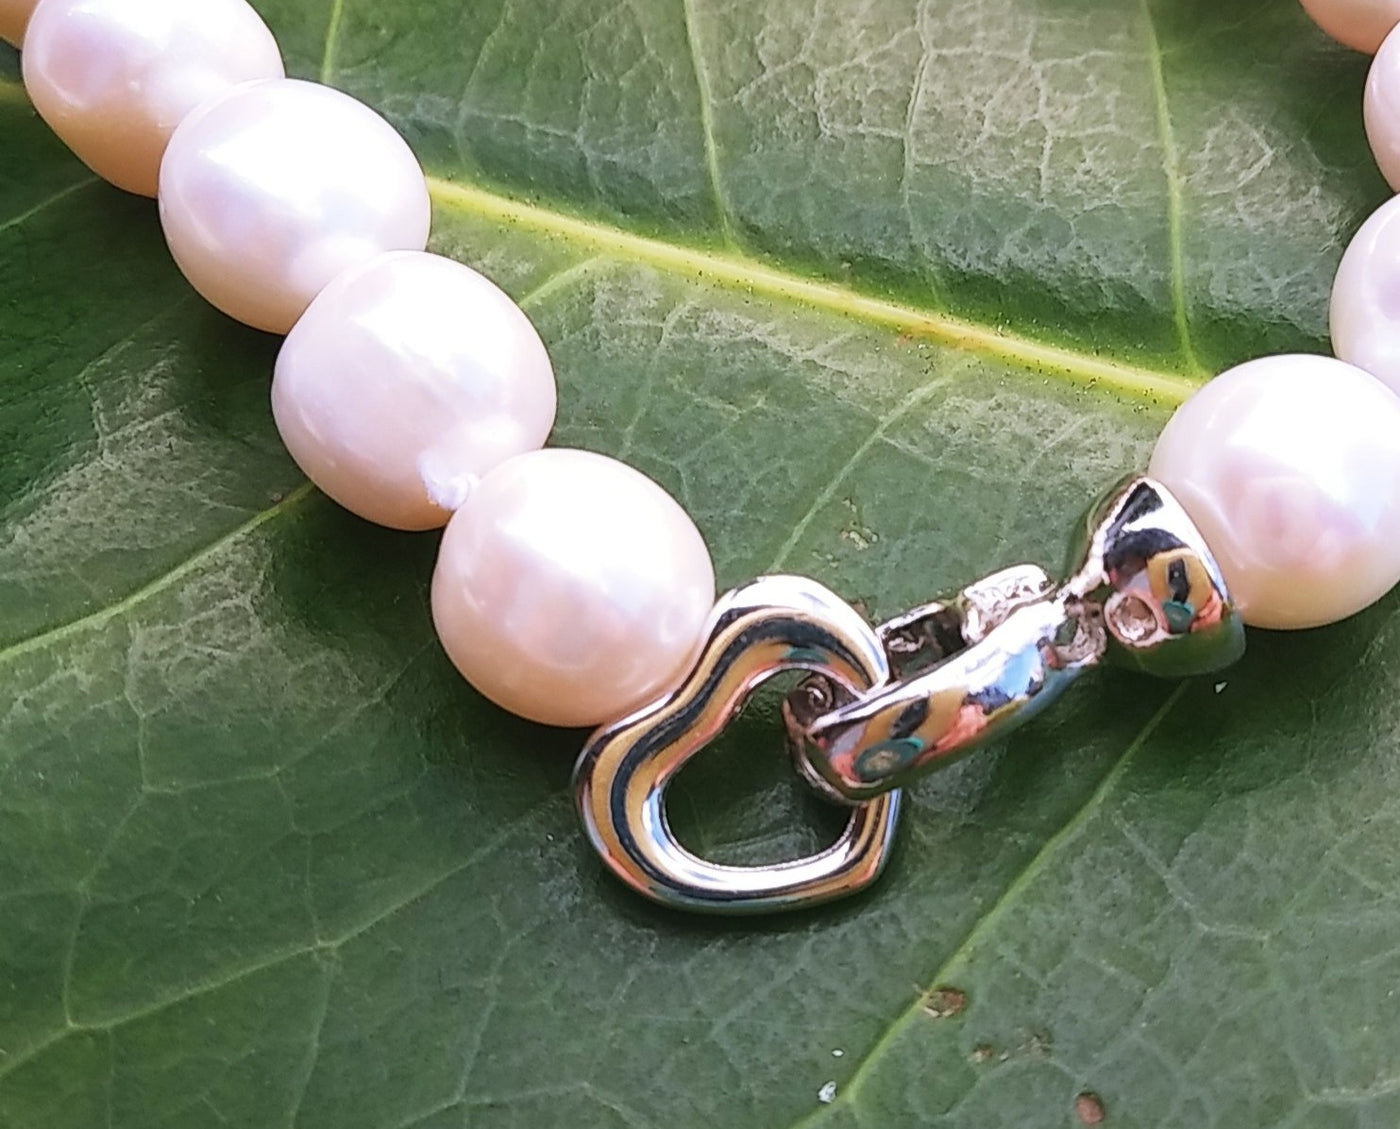 "My Baby Love" - Pearl Bracelet with Decorative Heart Clasp